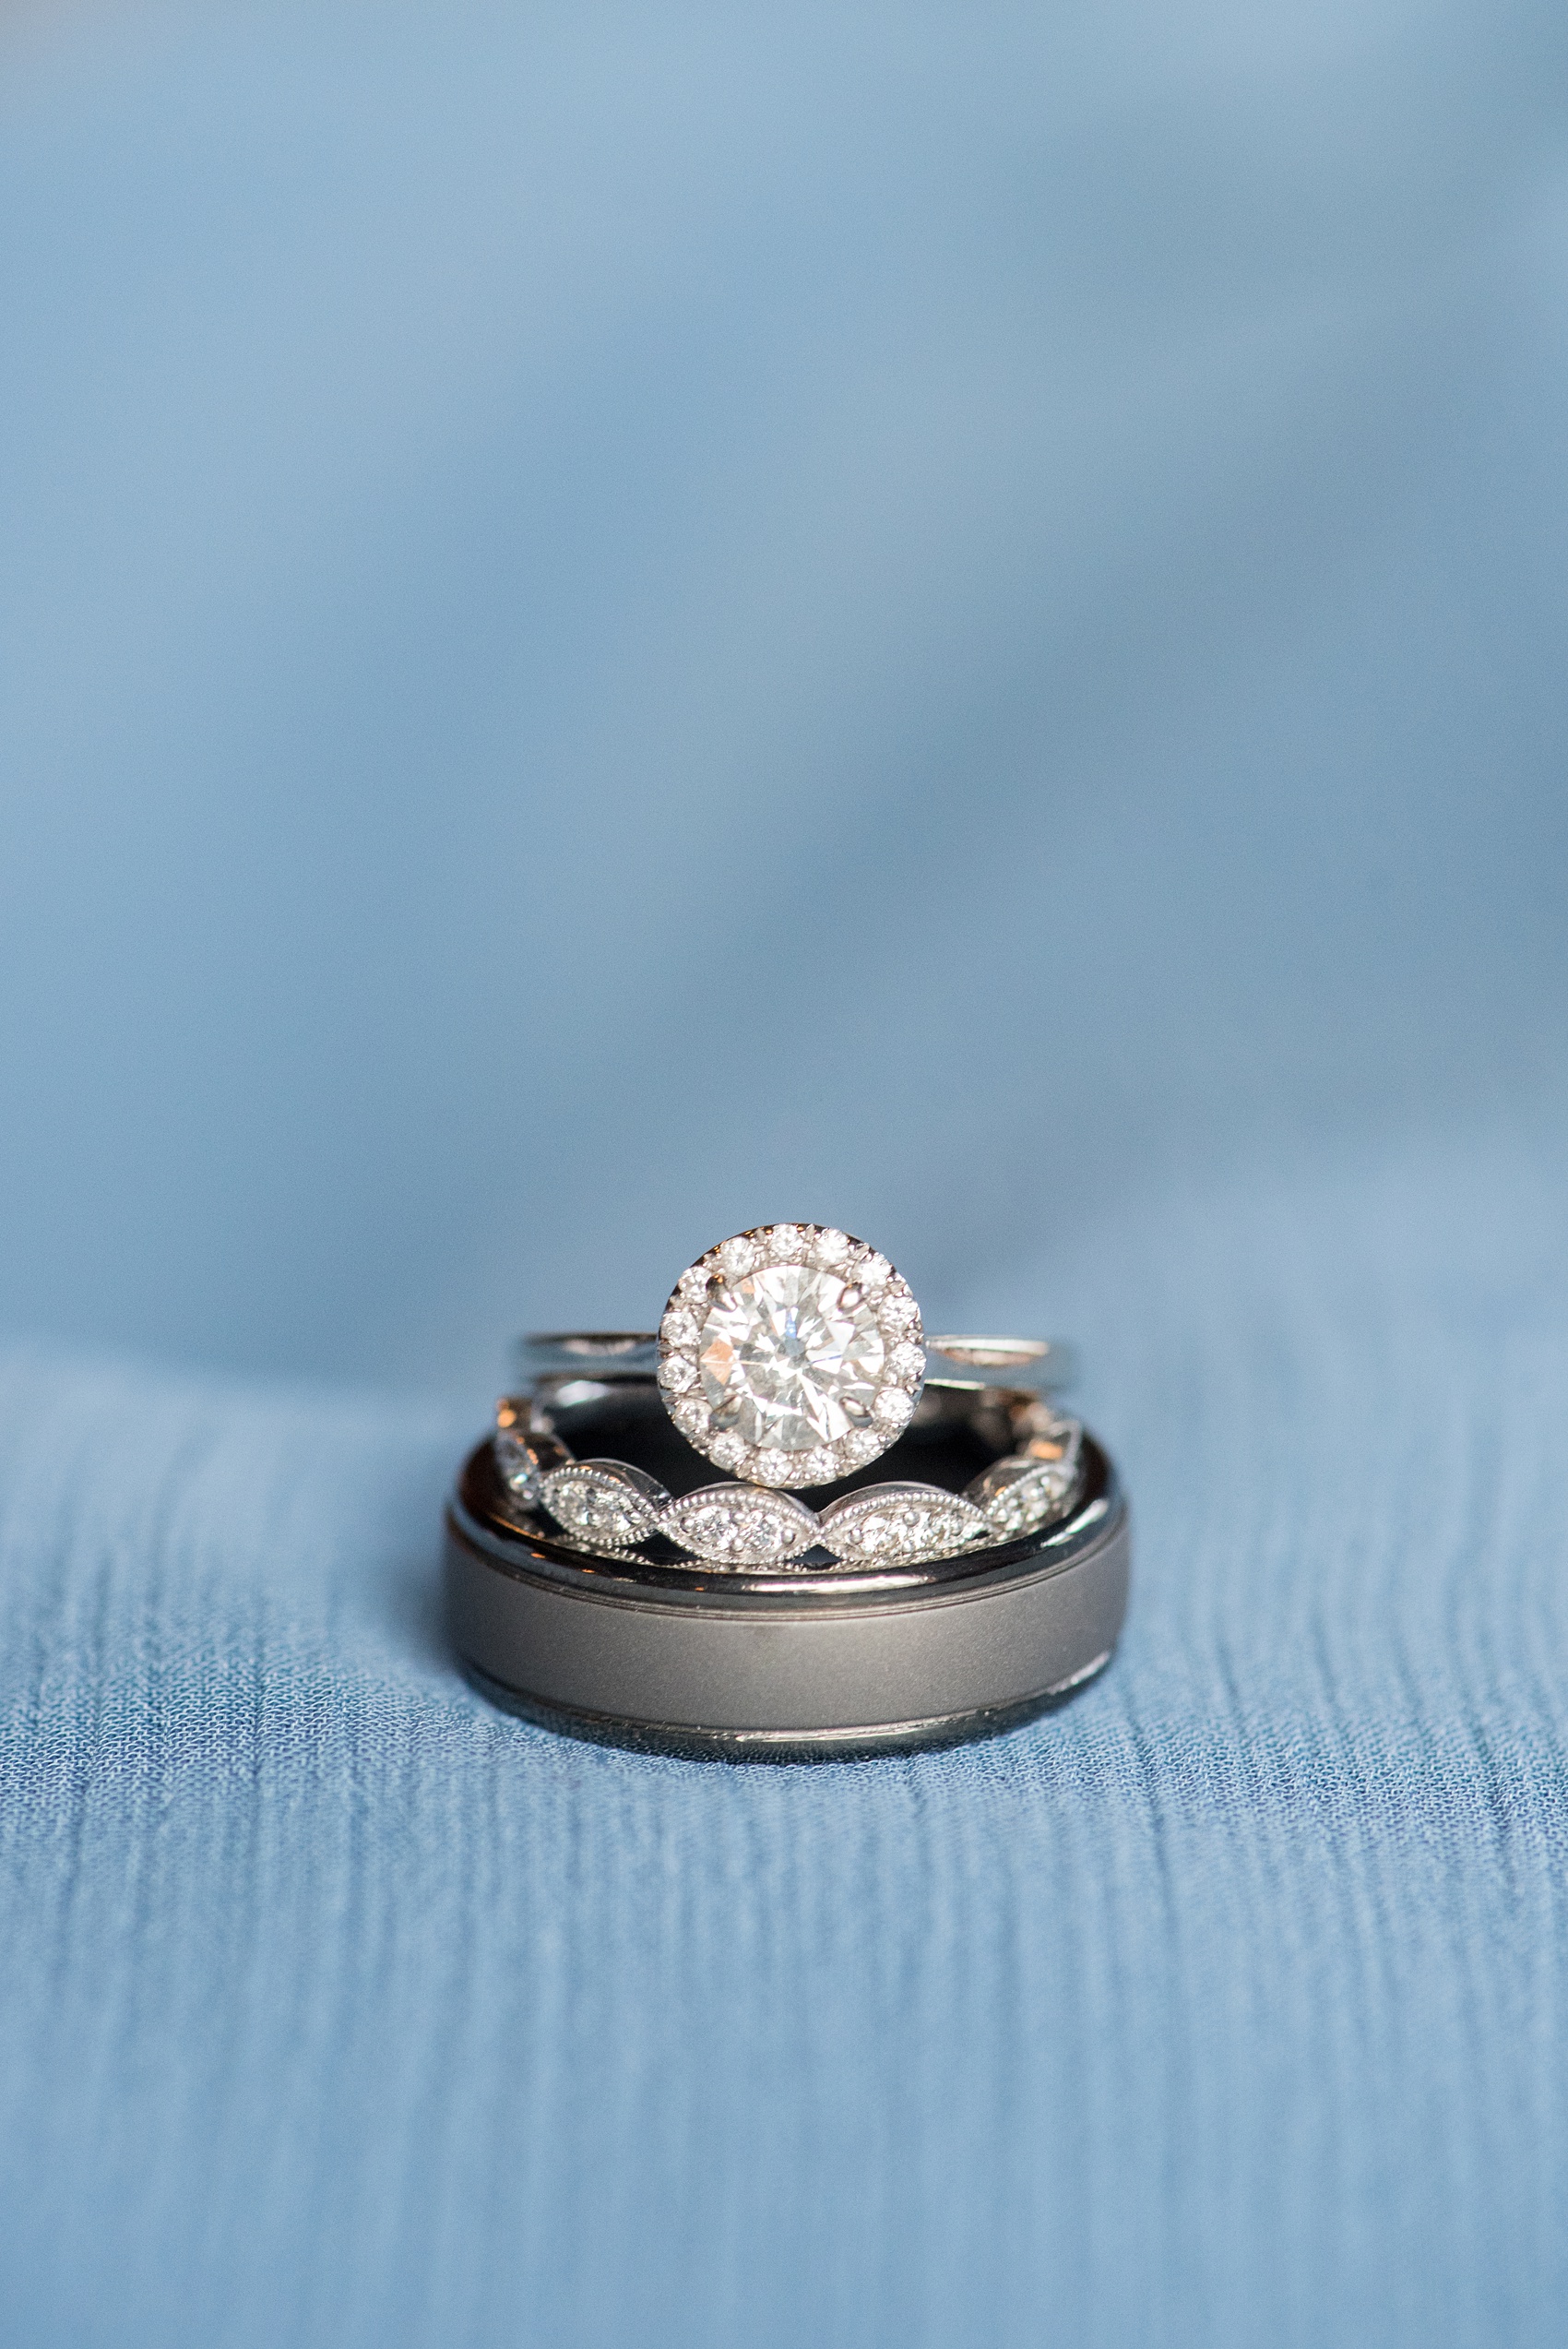 Durham wedding photos at The Cookery by Mikkel Paige Photography in North Carolina. This detail picture shows the bride's round halo diamond engagement ring, marquee wedding band and groom's gunmetal ring.